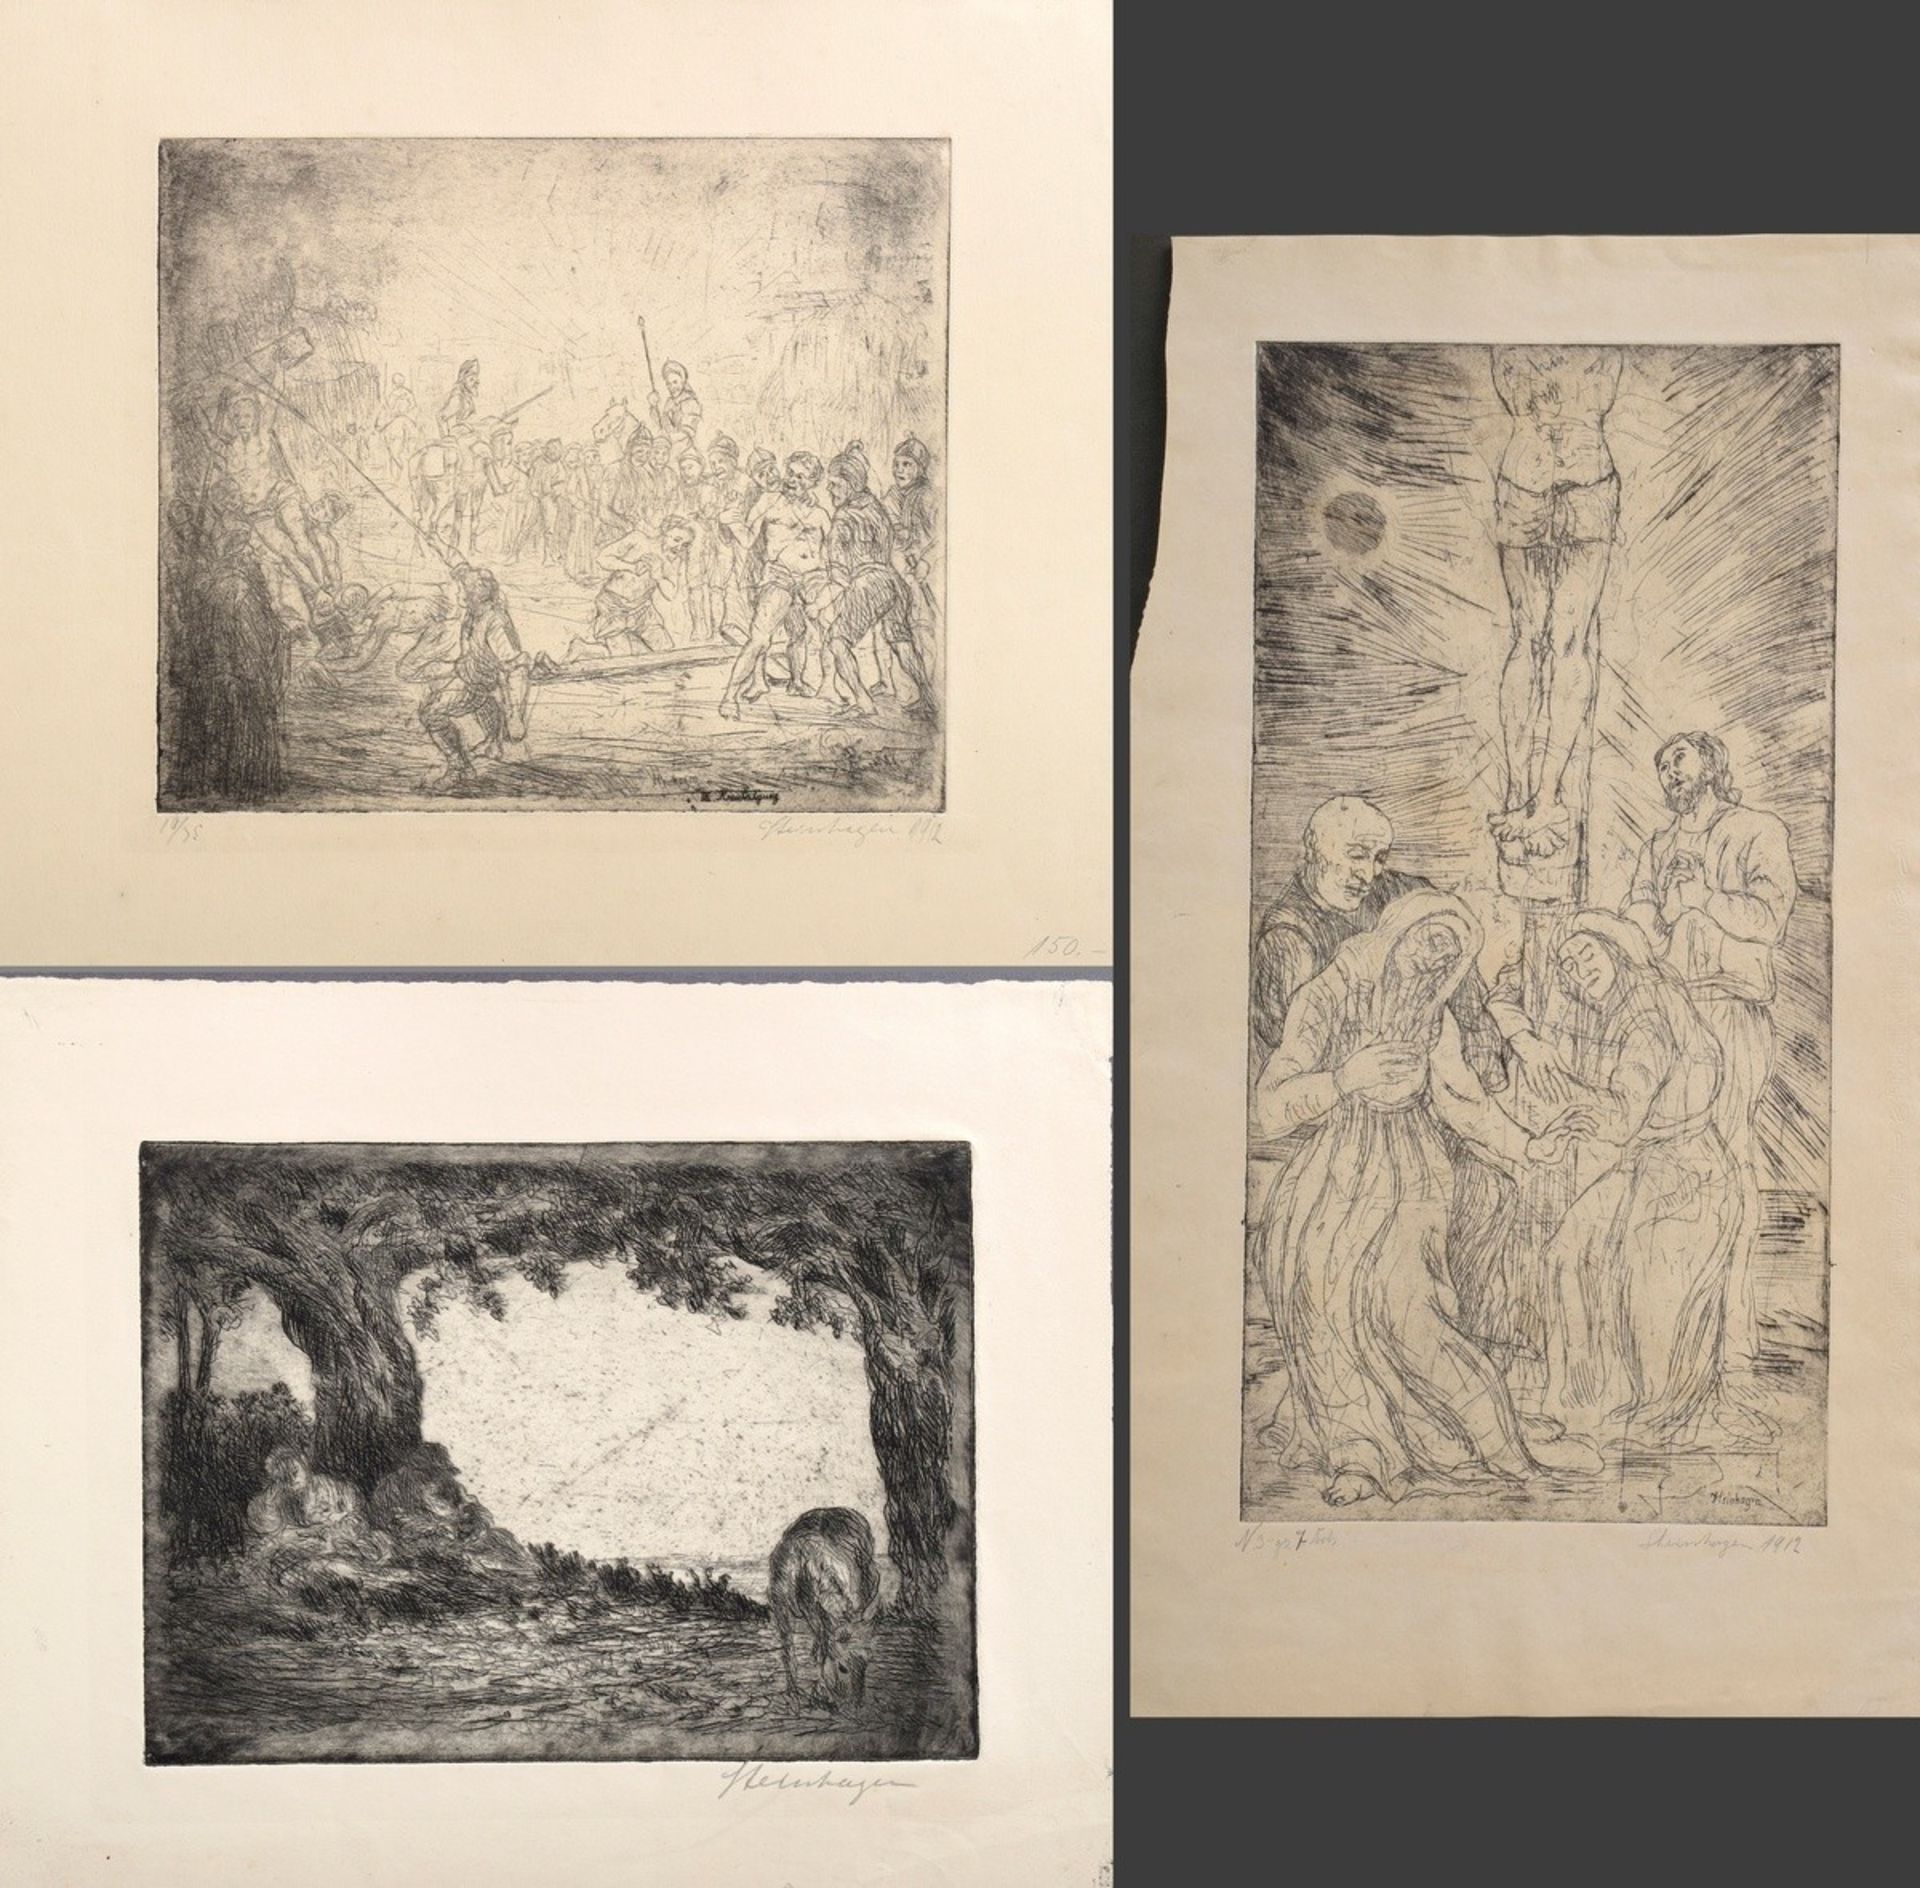 3 Steinhagen, Heinrich (1880-1948) "Christian Scenes", etchings, signed on the plate, 1x titled, si